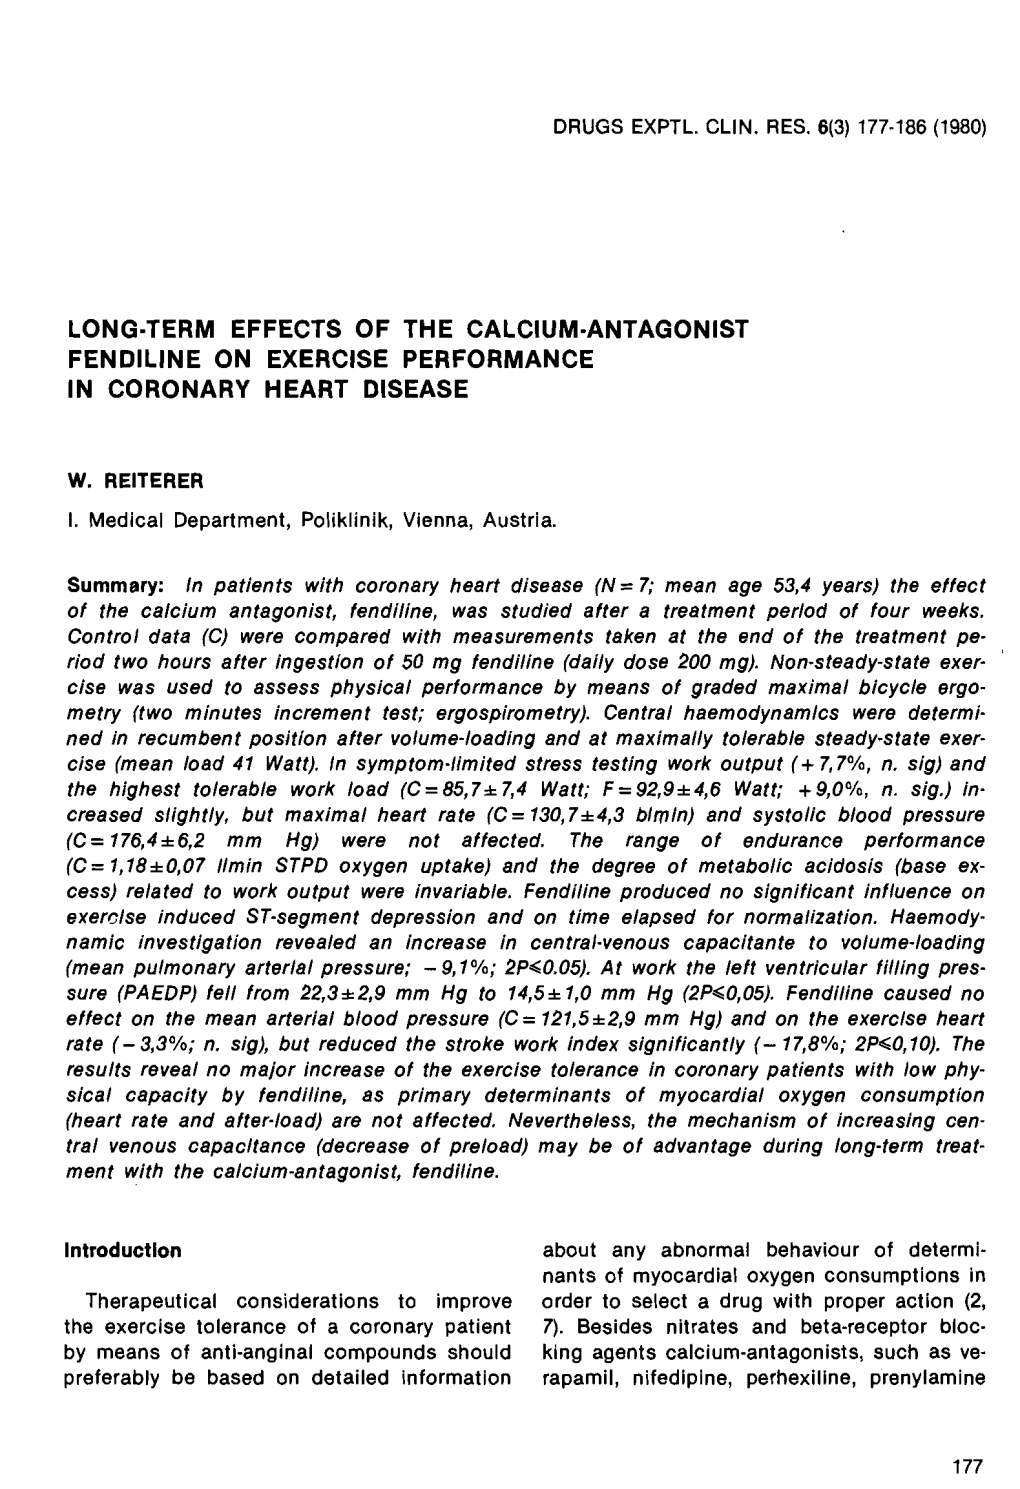 Long·Term Effects of the Calcium·Antagonist Fendiline on Exercise Performance in Coronary Heart Disease